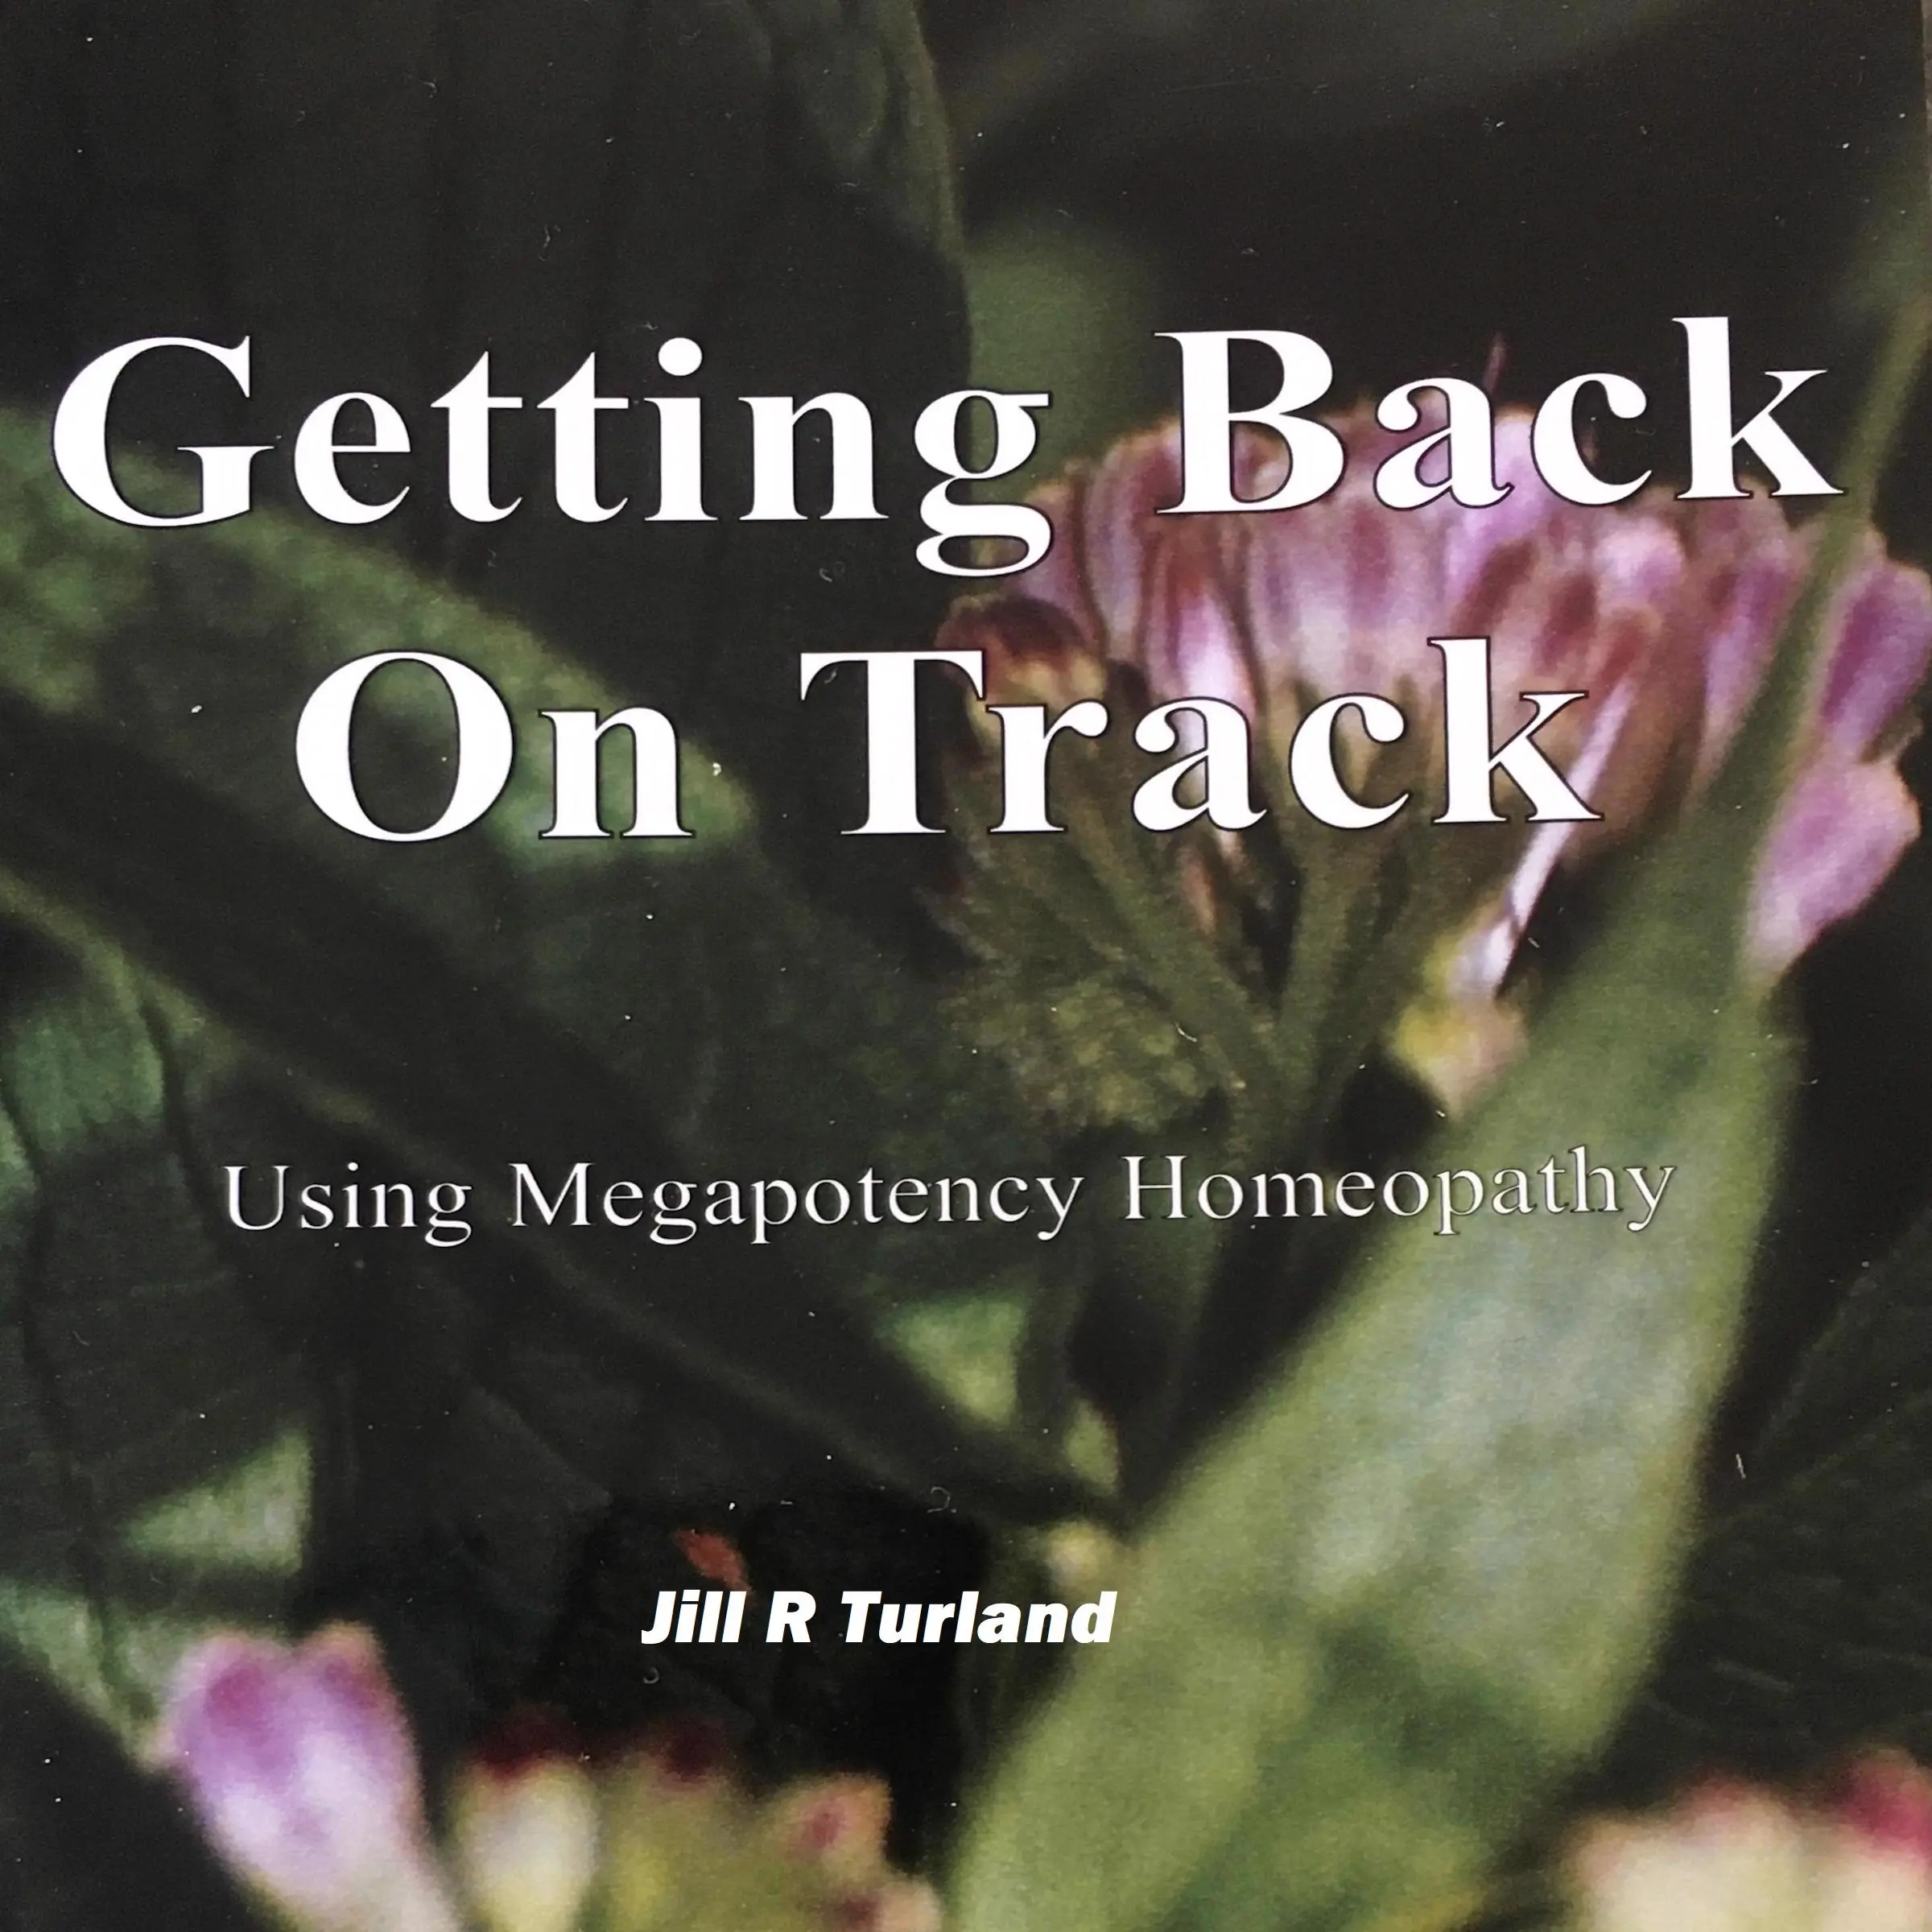 Getting Back On Track Audiobook by Jill R Turland